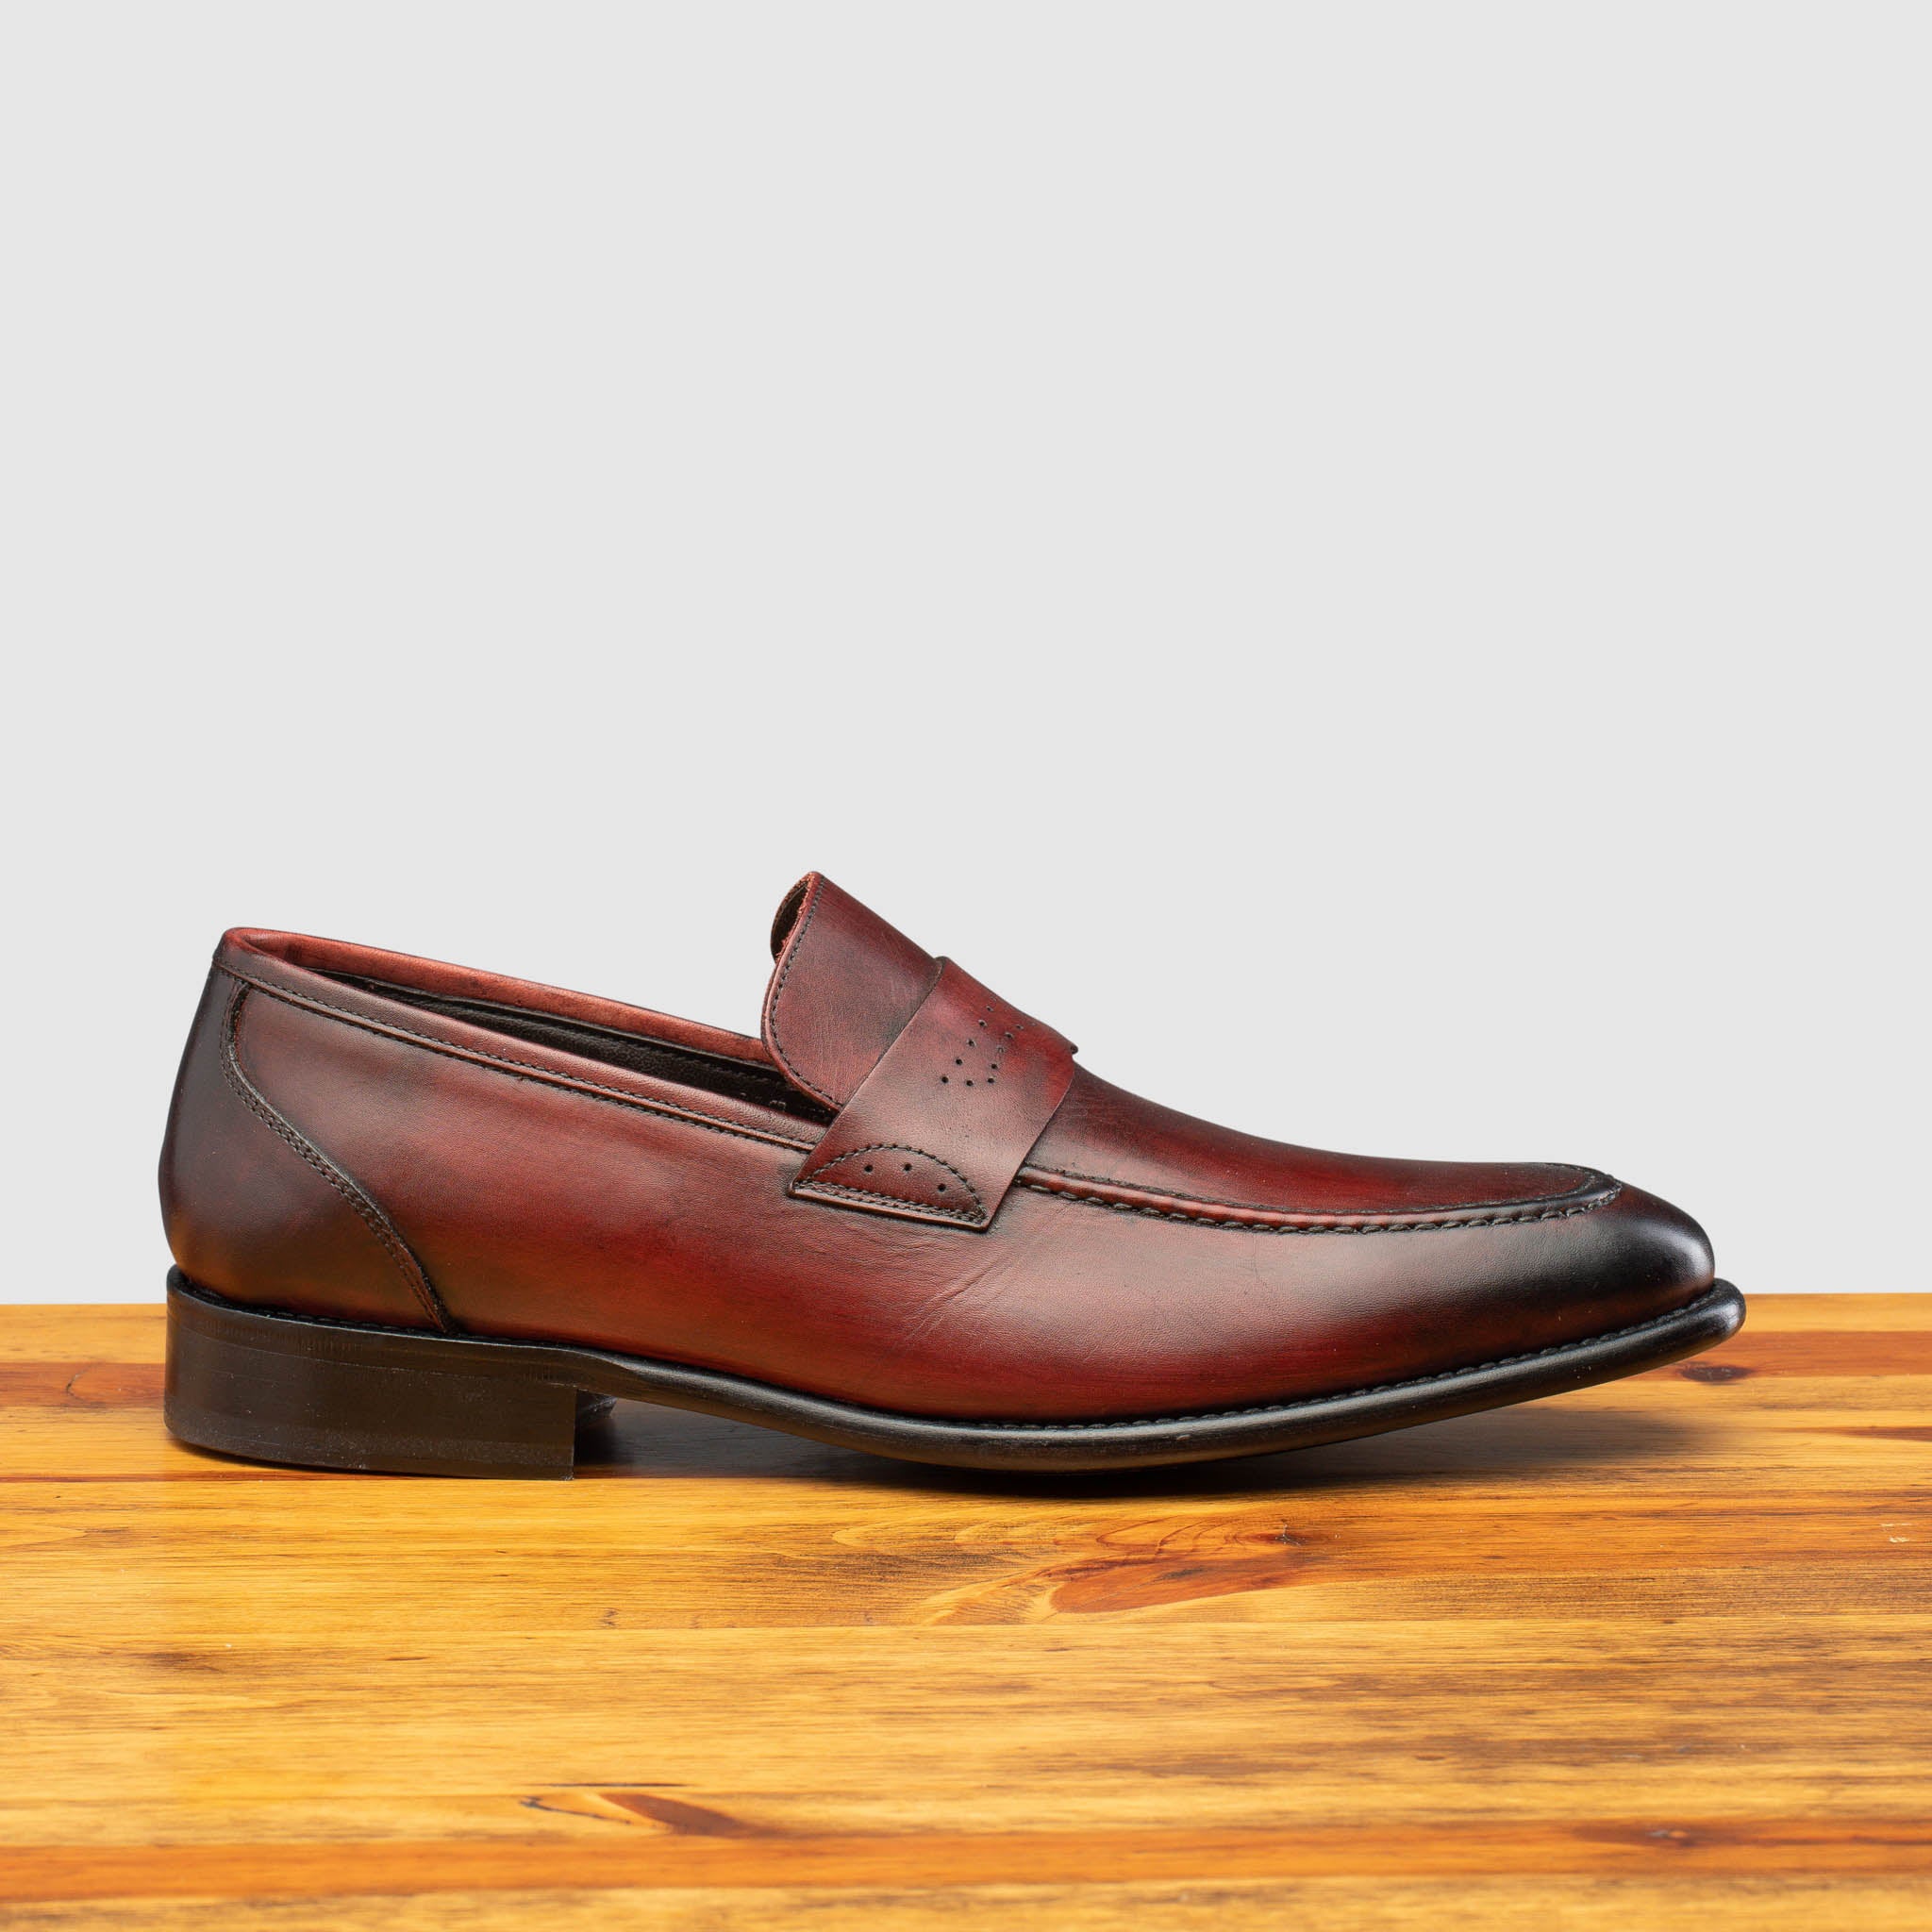 Side profile of Q540 Calzoleria Toscana Burgundy  (Porpora) Wholecut Slip-On on top of a wooden table